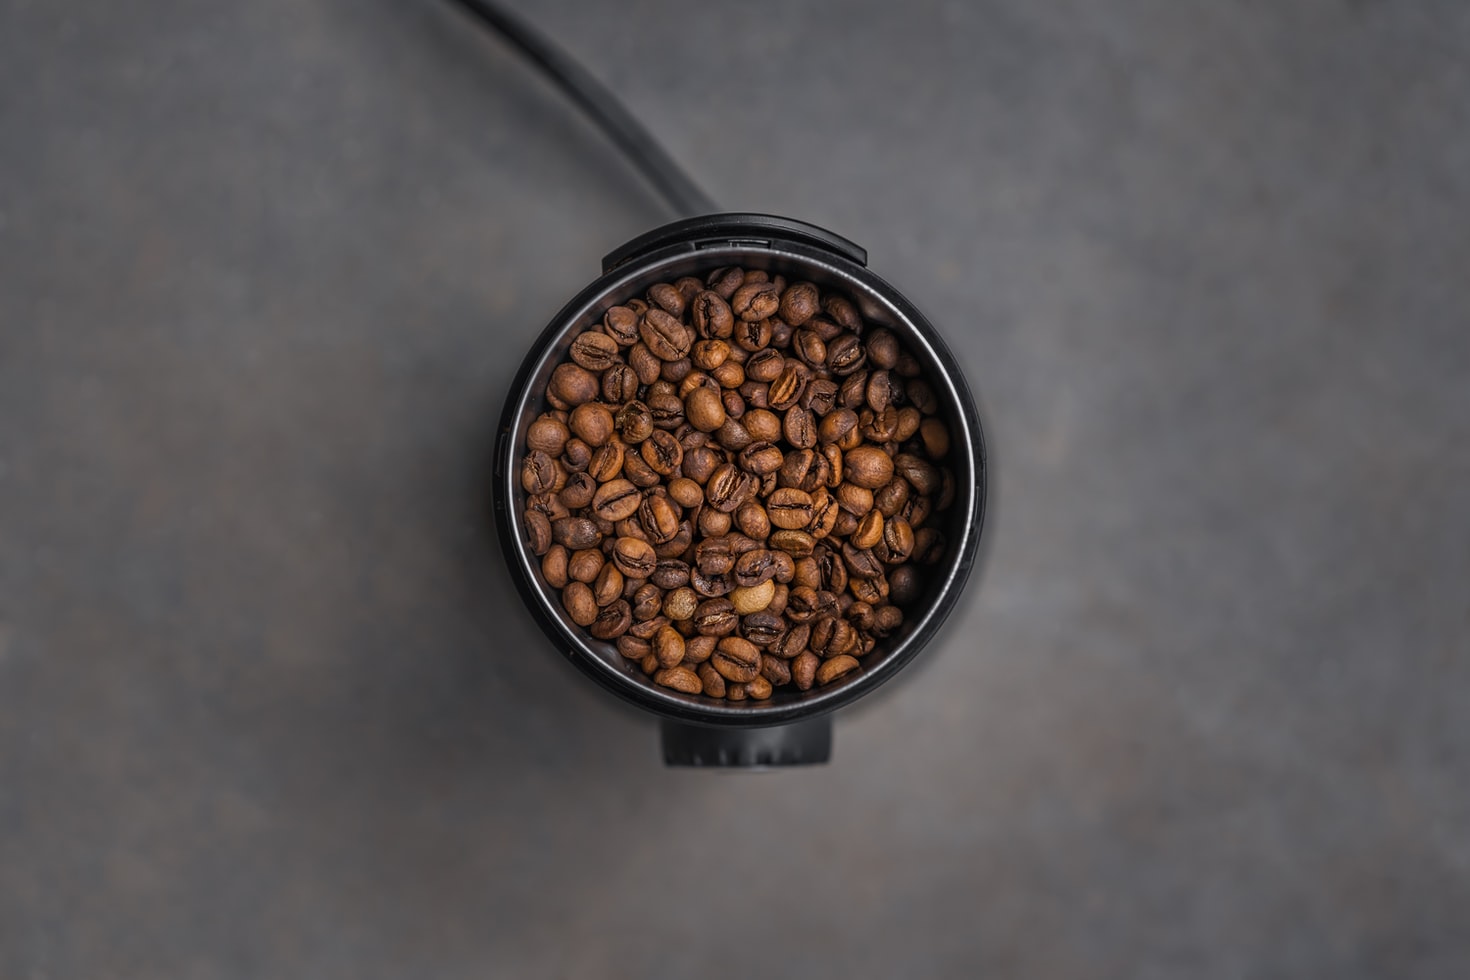 Why Coffee Grind Size Matters